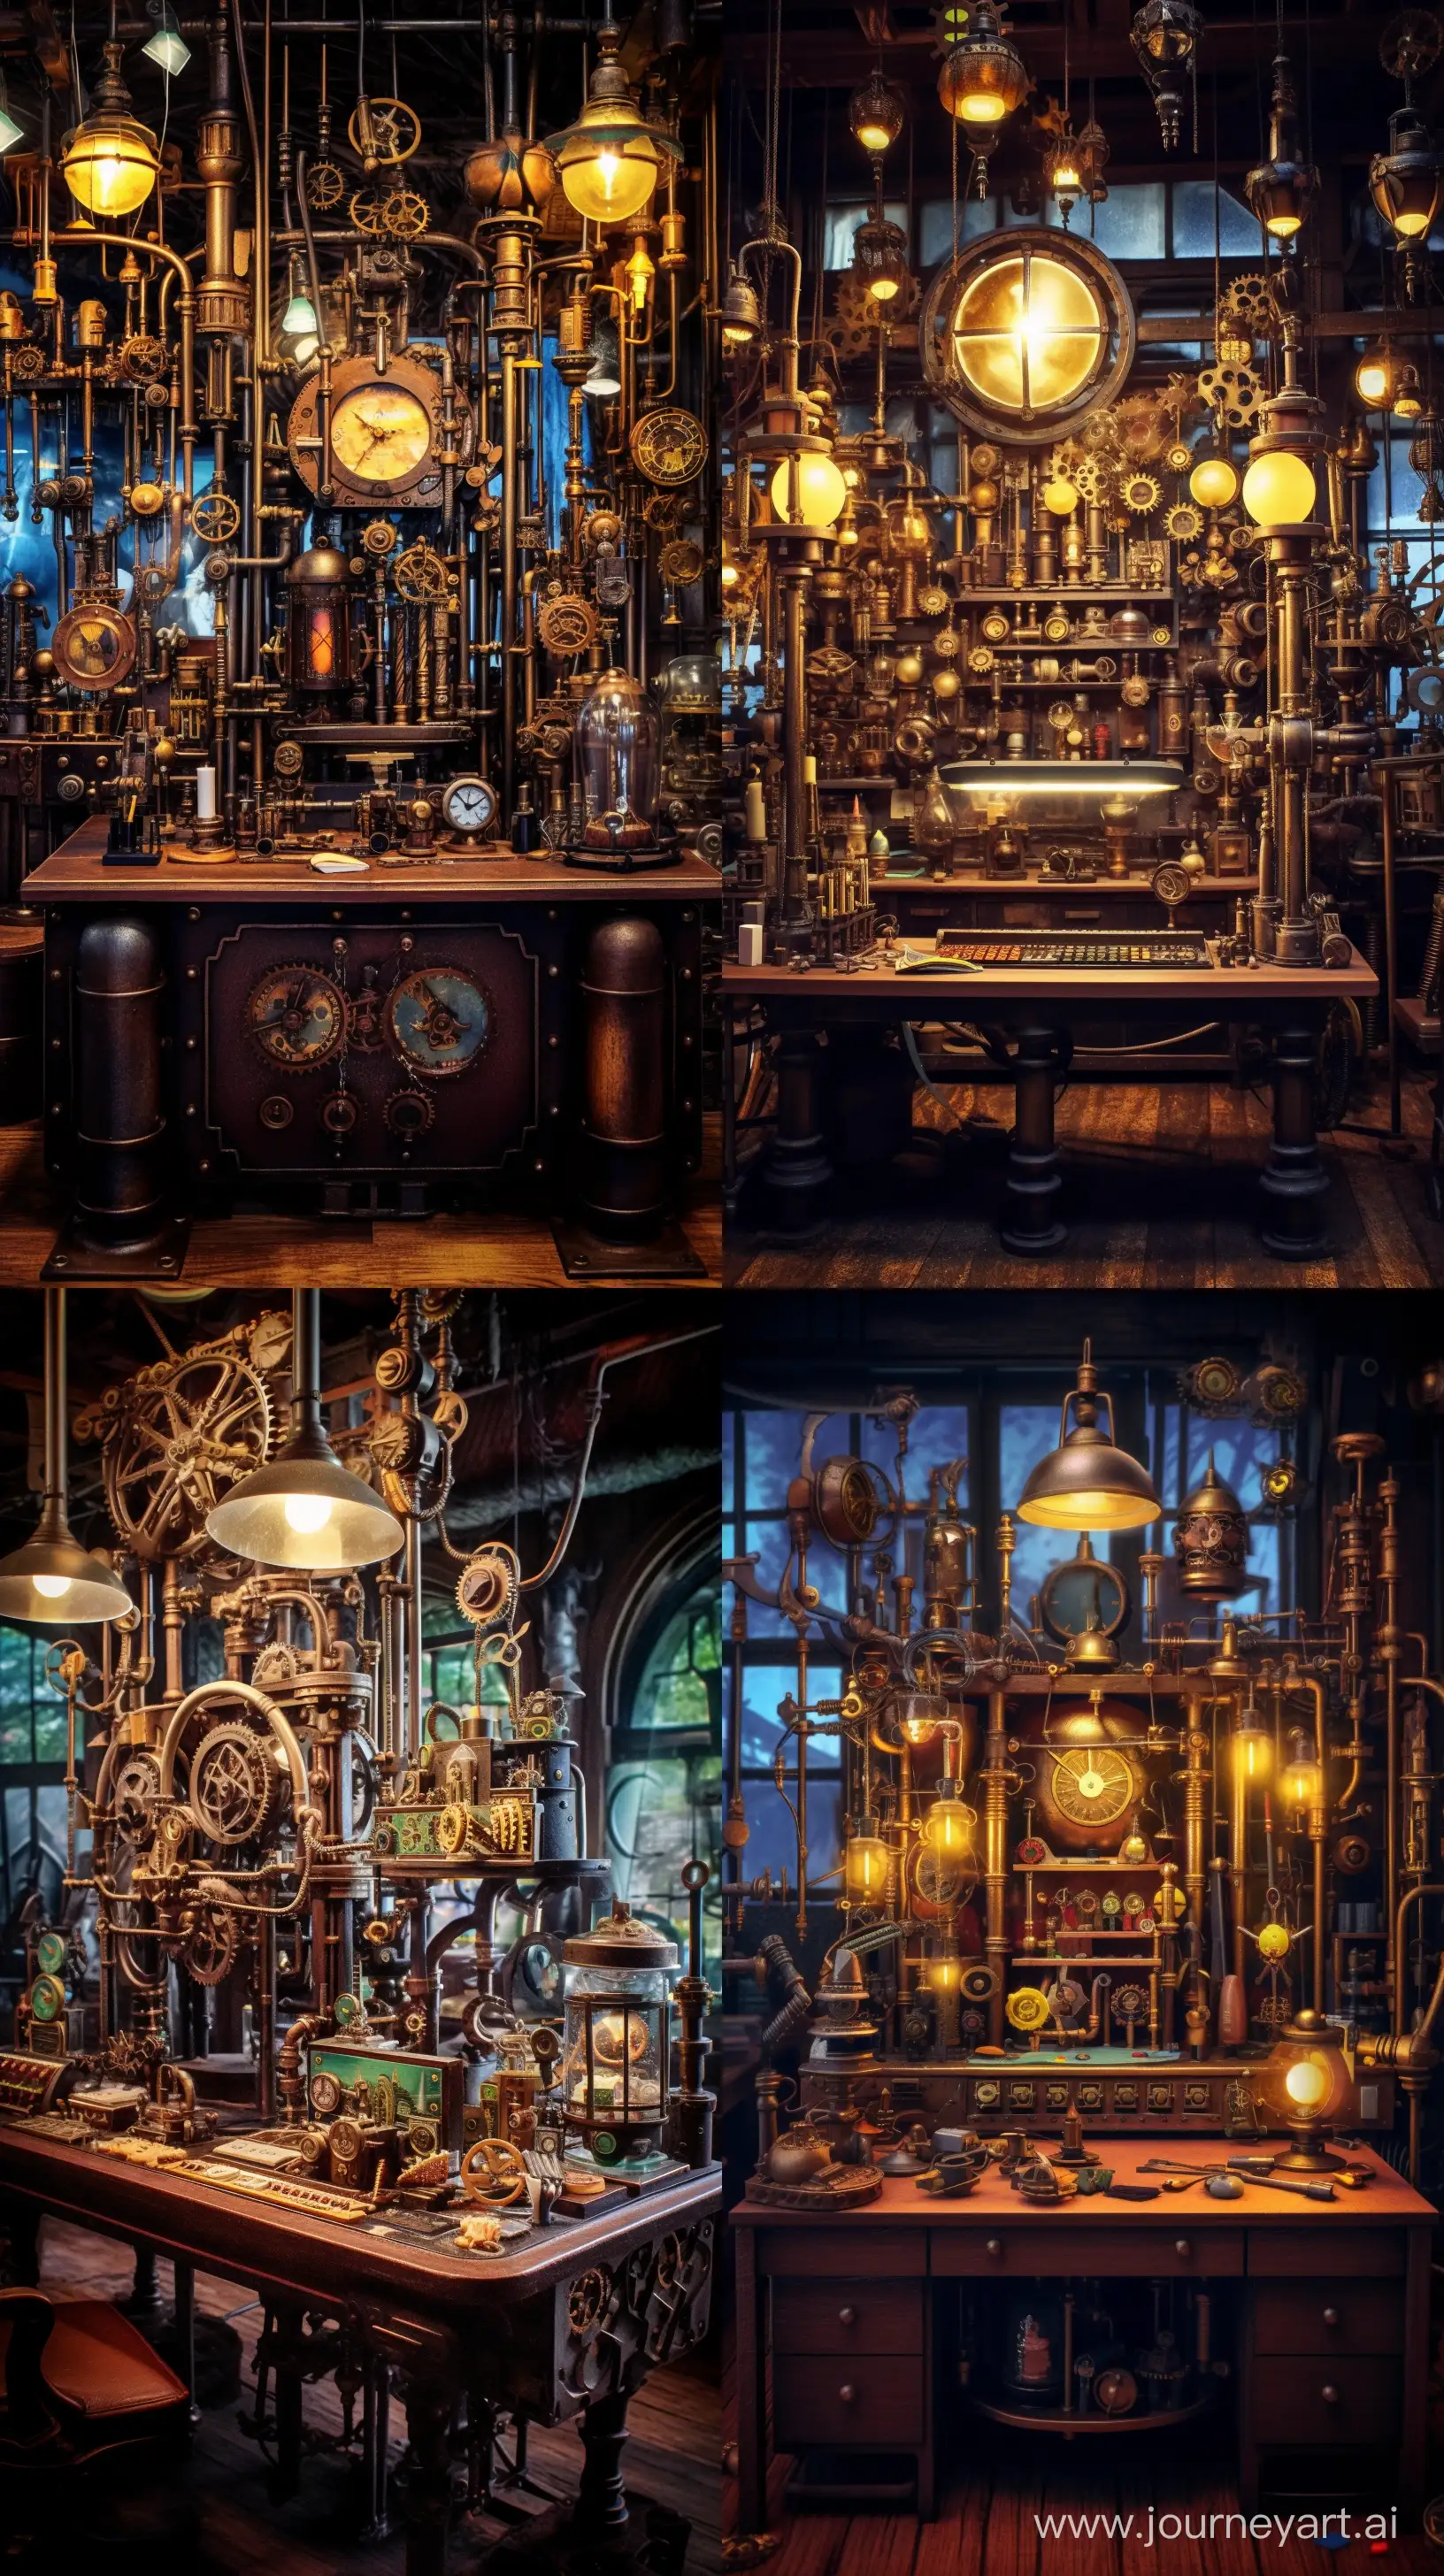 A steampunk inventor's workshop, medium: digital art, style: akin to the works of Kazuhiko Nakamura, lighting: artificial gas lamps, colors: dark wood and metallics, composition: Sony α1, FE 50mm F1.2 GM lens, ISO 200, f/4, shutter speed 1/60, prime lens --ar 9:16 --v 5.1 --style raw --q 2 --s 750